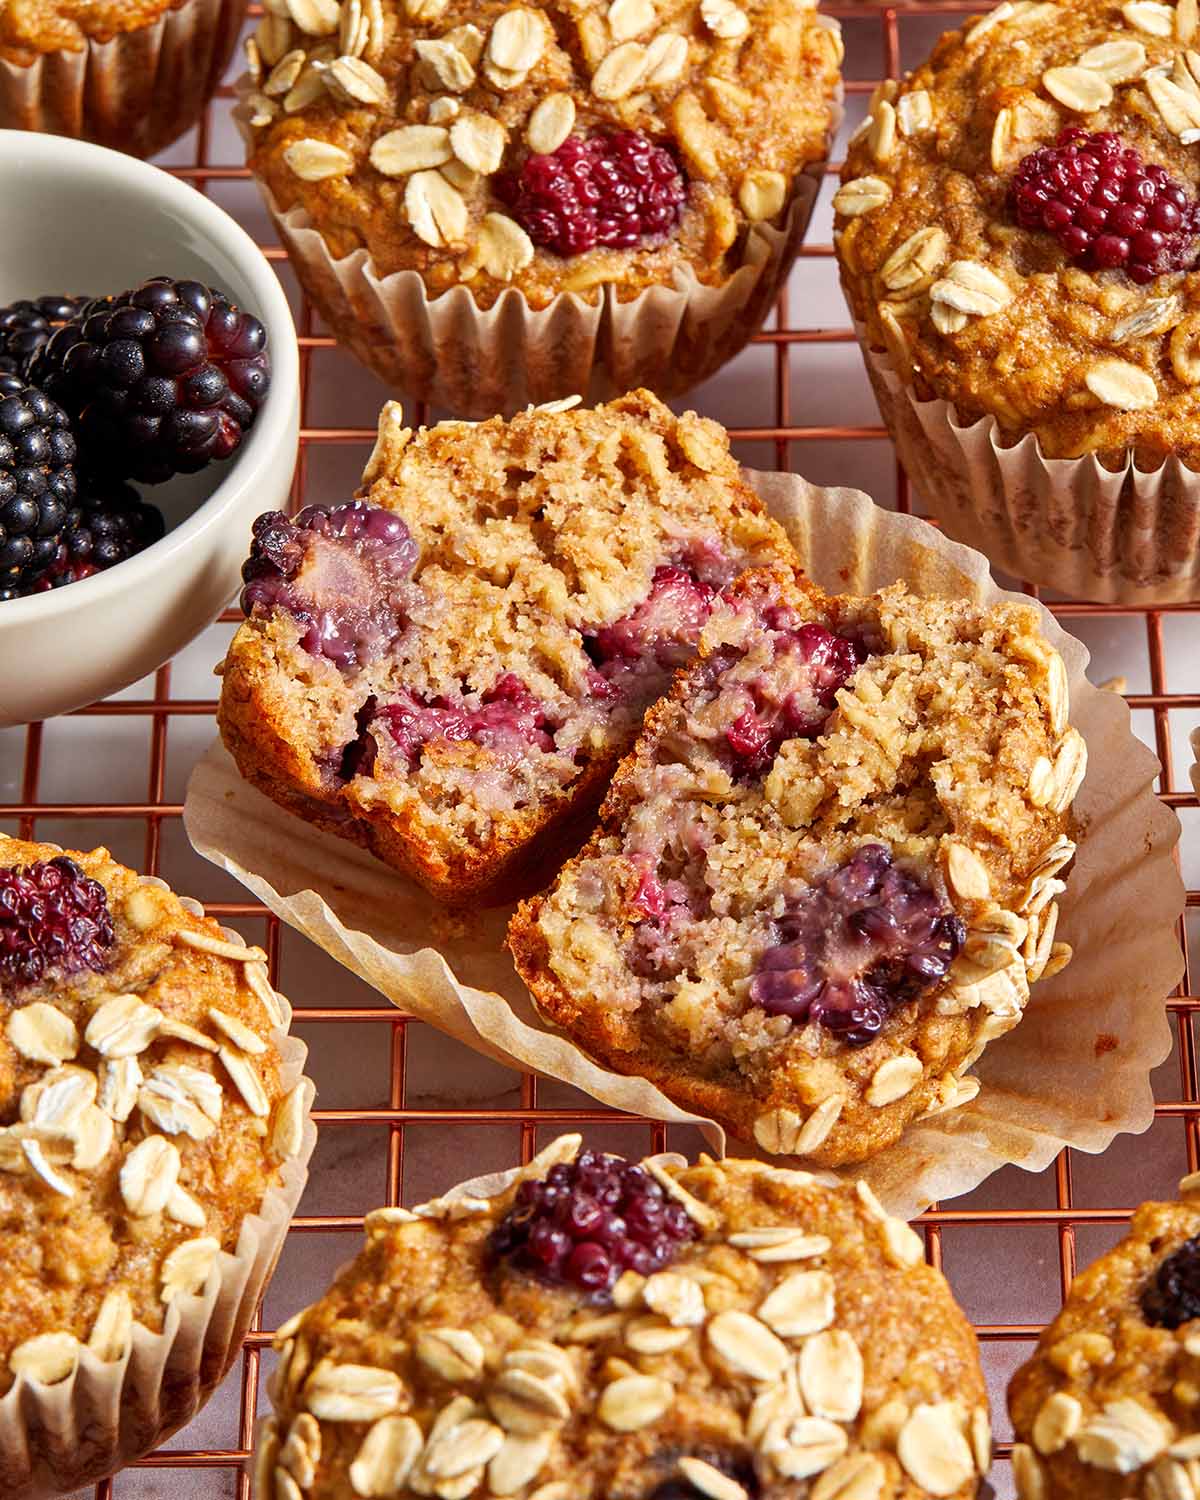 Muffin cut open showing the inside texture and blackberries.